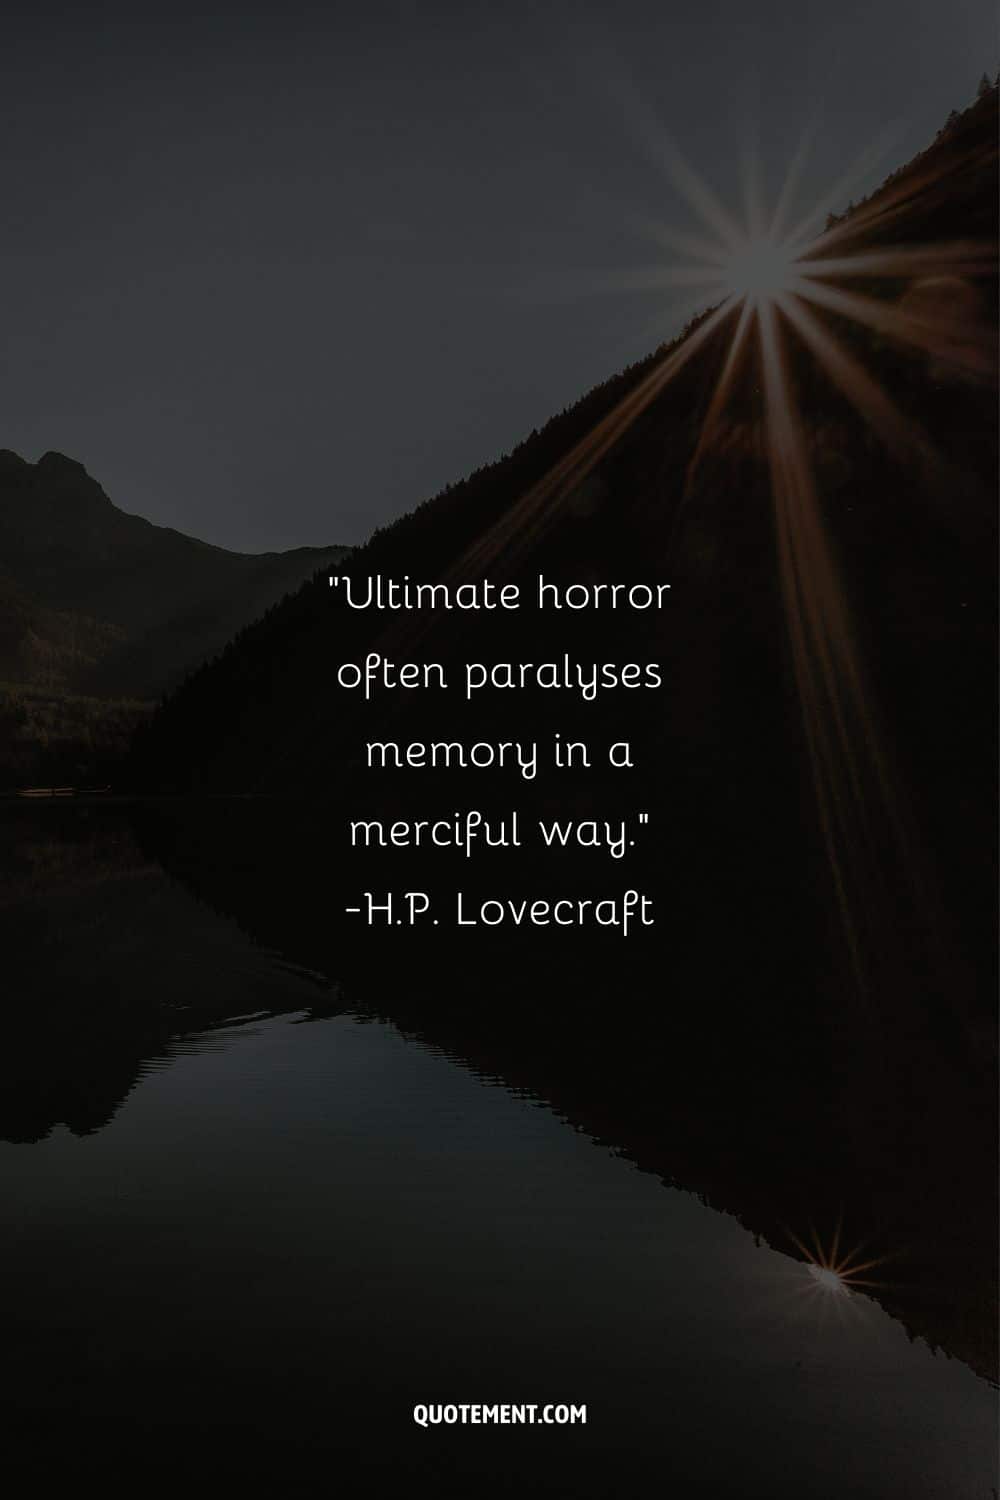 Ultimate horror often paralyses memory in a merciful way